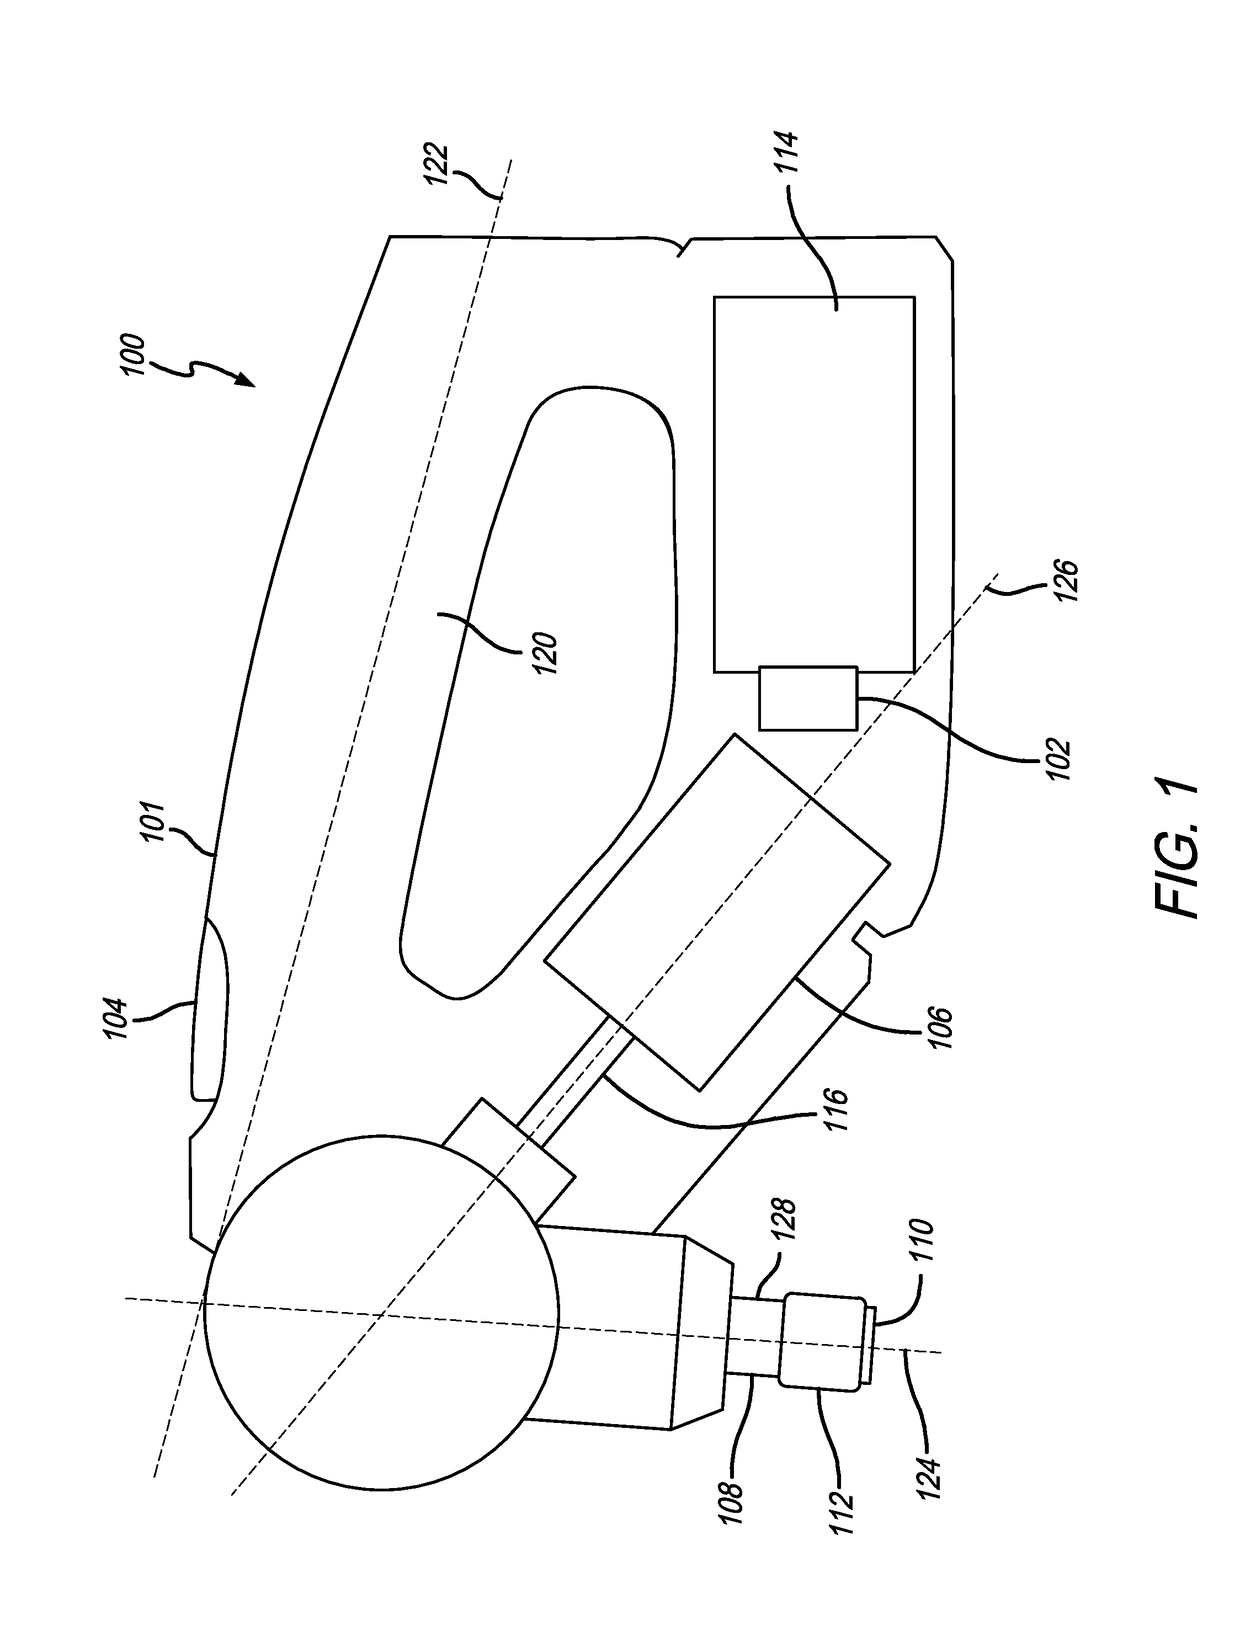 Massage device and method of use